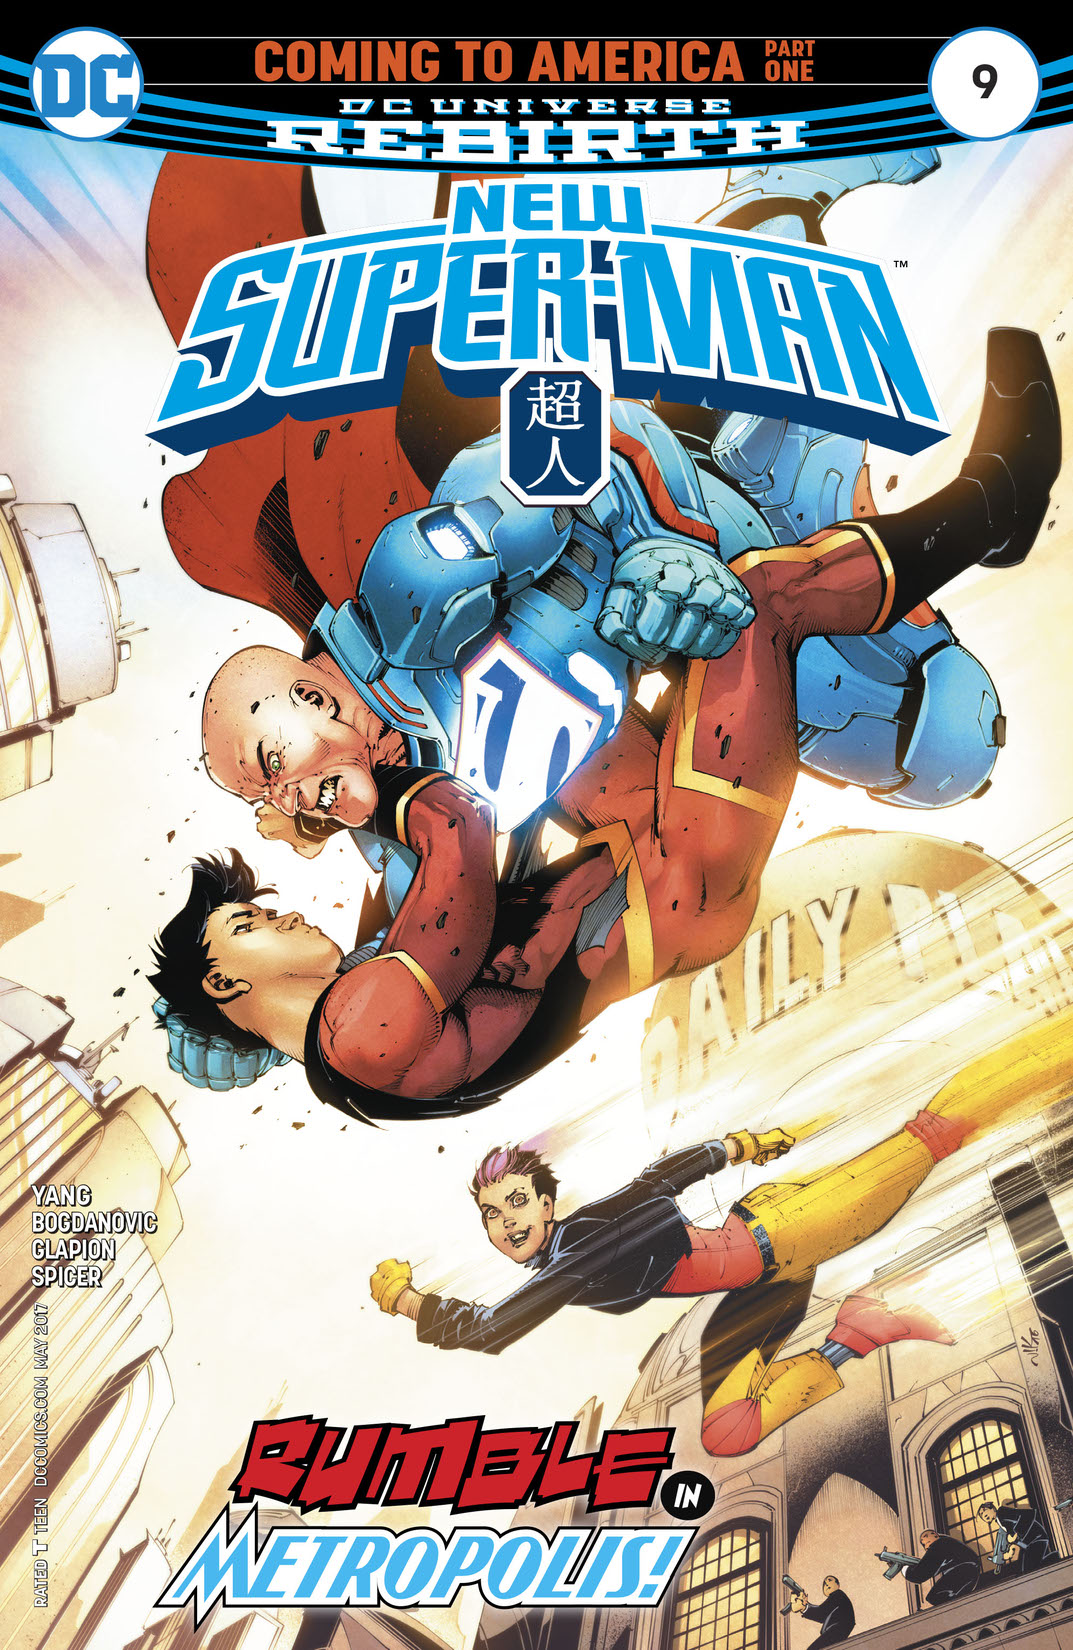 New Super-Man #9 preview images